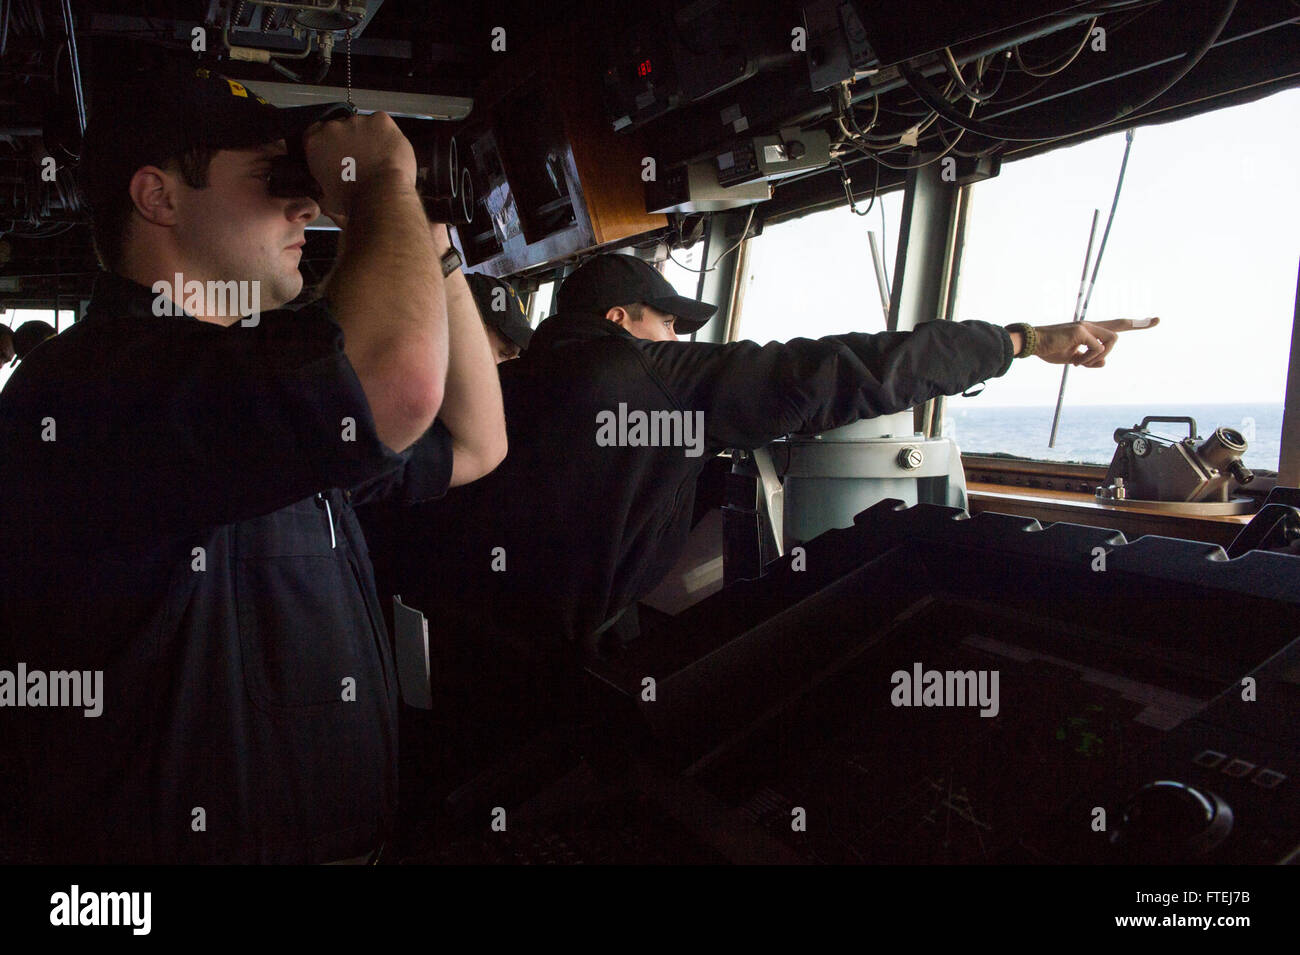 MEDITERRANEAN SEA (November 9, 2014) – Ensign Dustin Baker points out range and bearing to Ensign David Mahoney aboard the Arleigh Burke-class guided-missile destroyer USS Cole (DDG 67) during exercise Mavi Balina. Exercise Mavi Balina is a biennial Turkish-led anti-submarine warfare maritime exercise involving NATO and regional forces in the eastern Mediterranean to improve interoperability and increase tactical proficiencies. Stock Photo